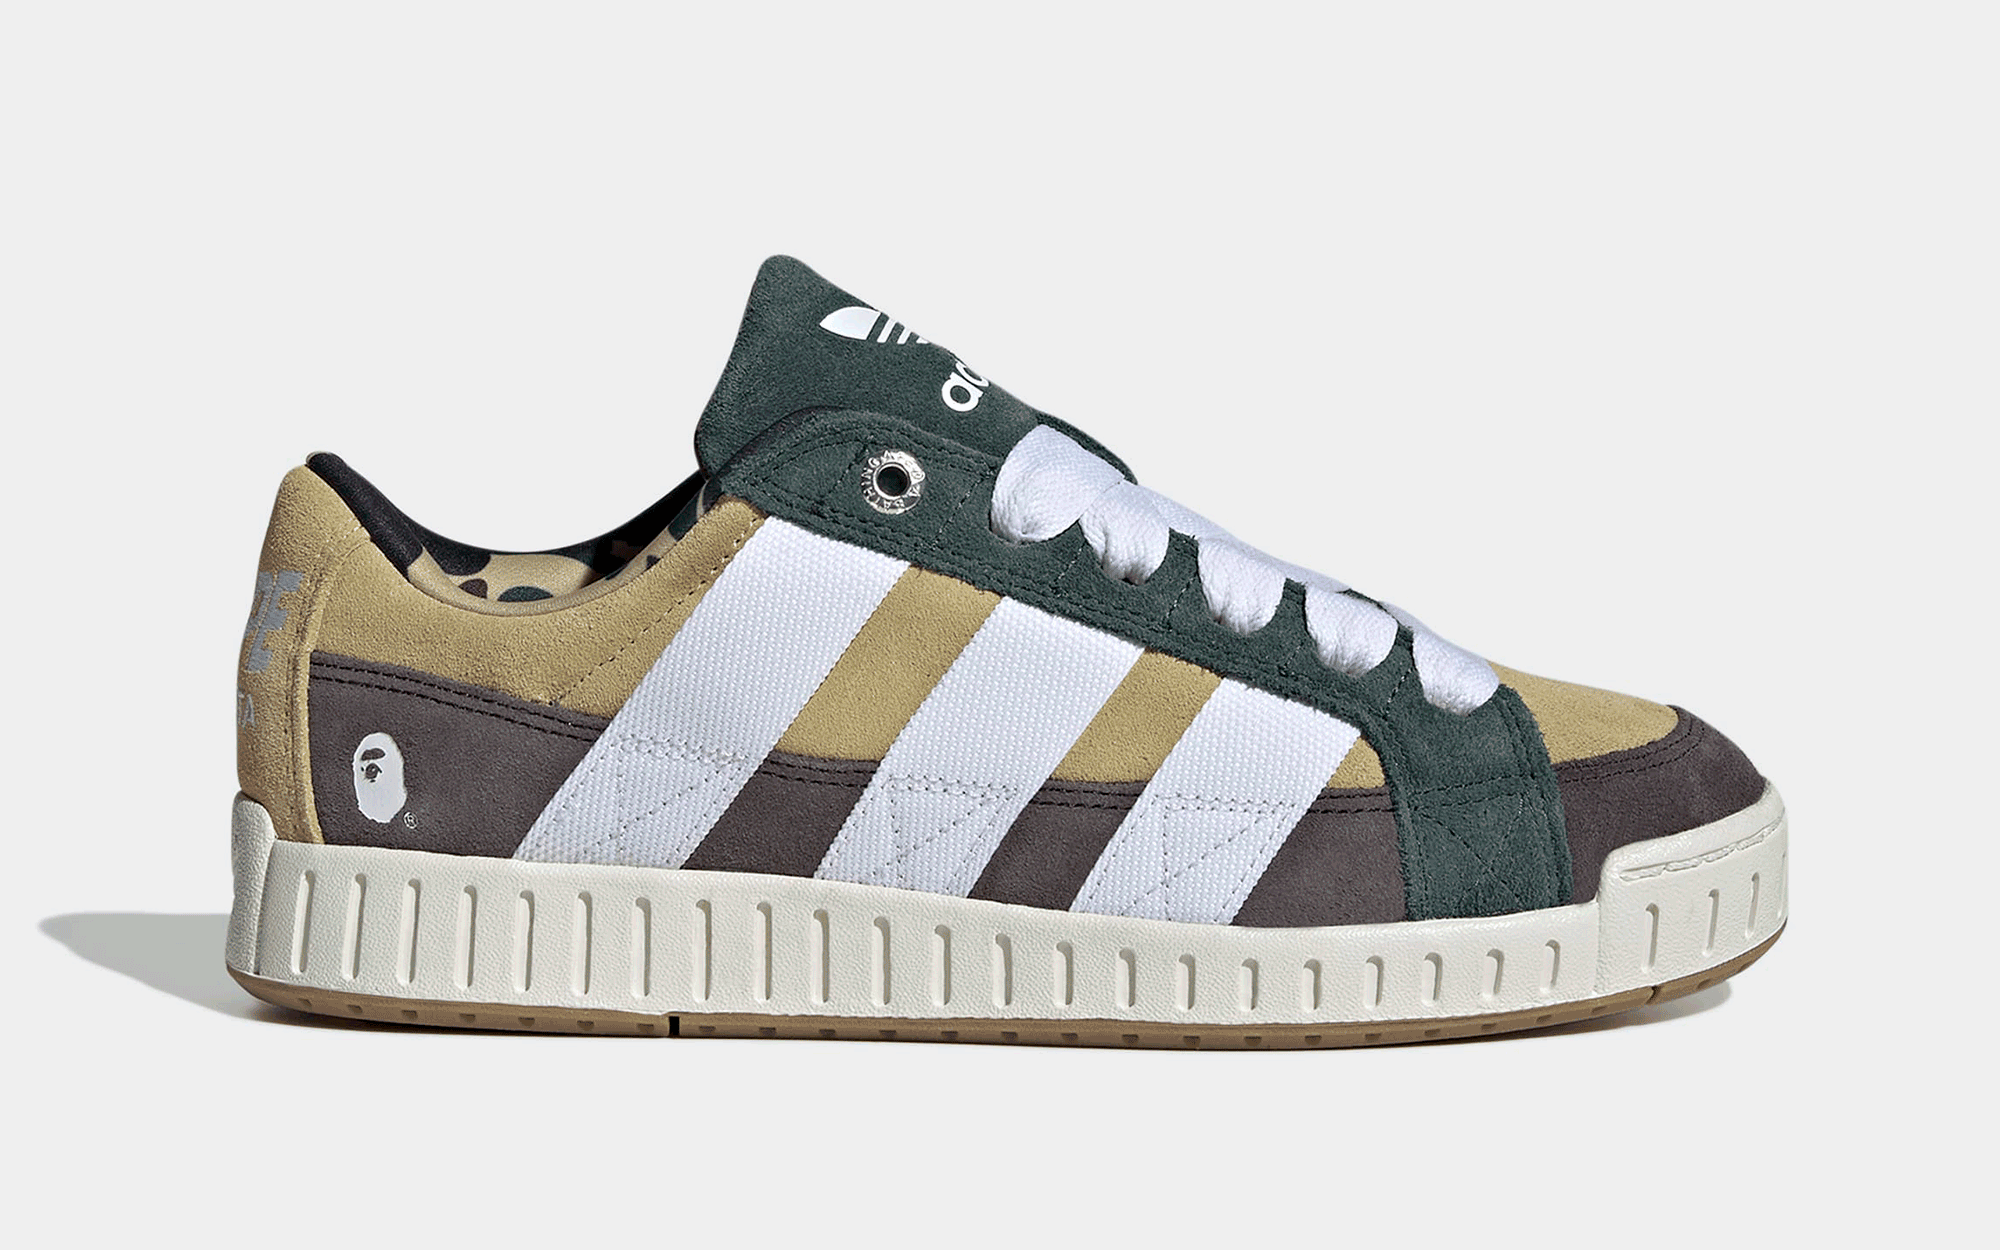 The ACCESSORIES Adidas N Bape Sneakers Release April 18